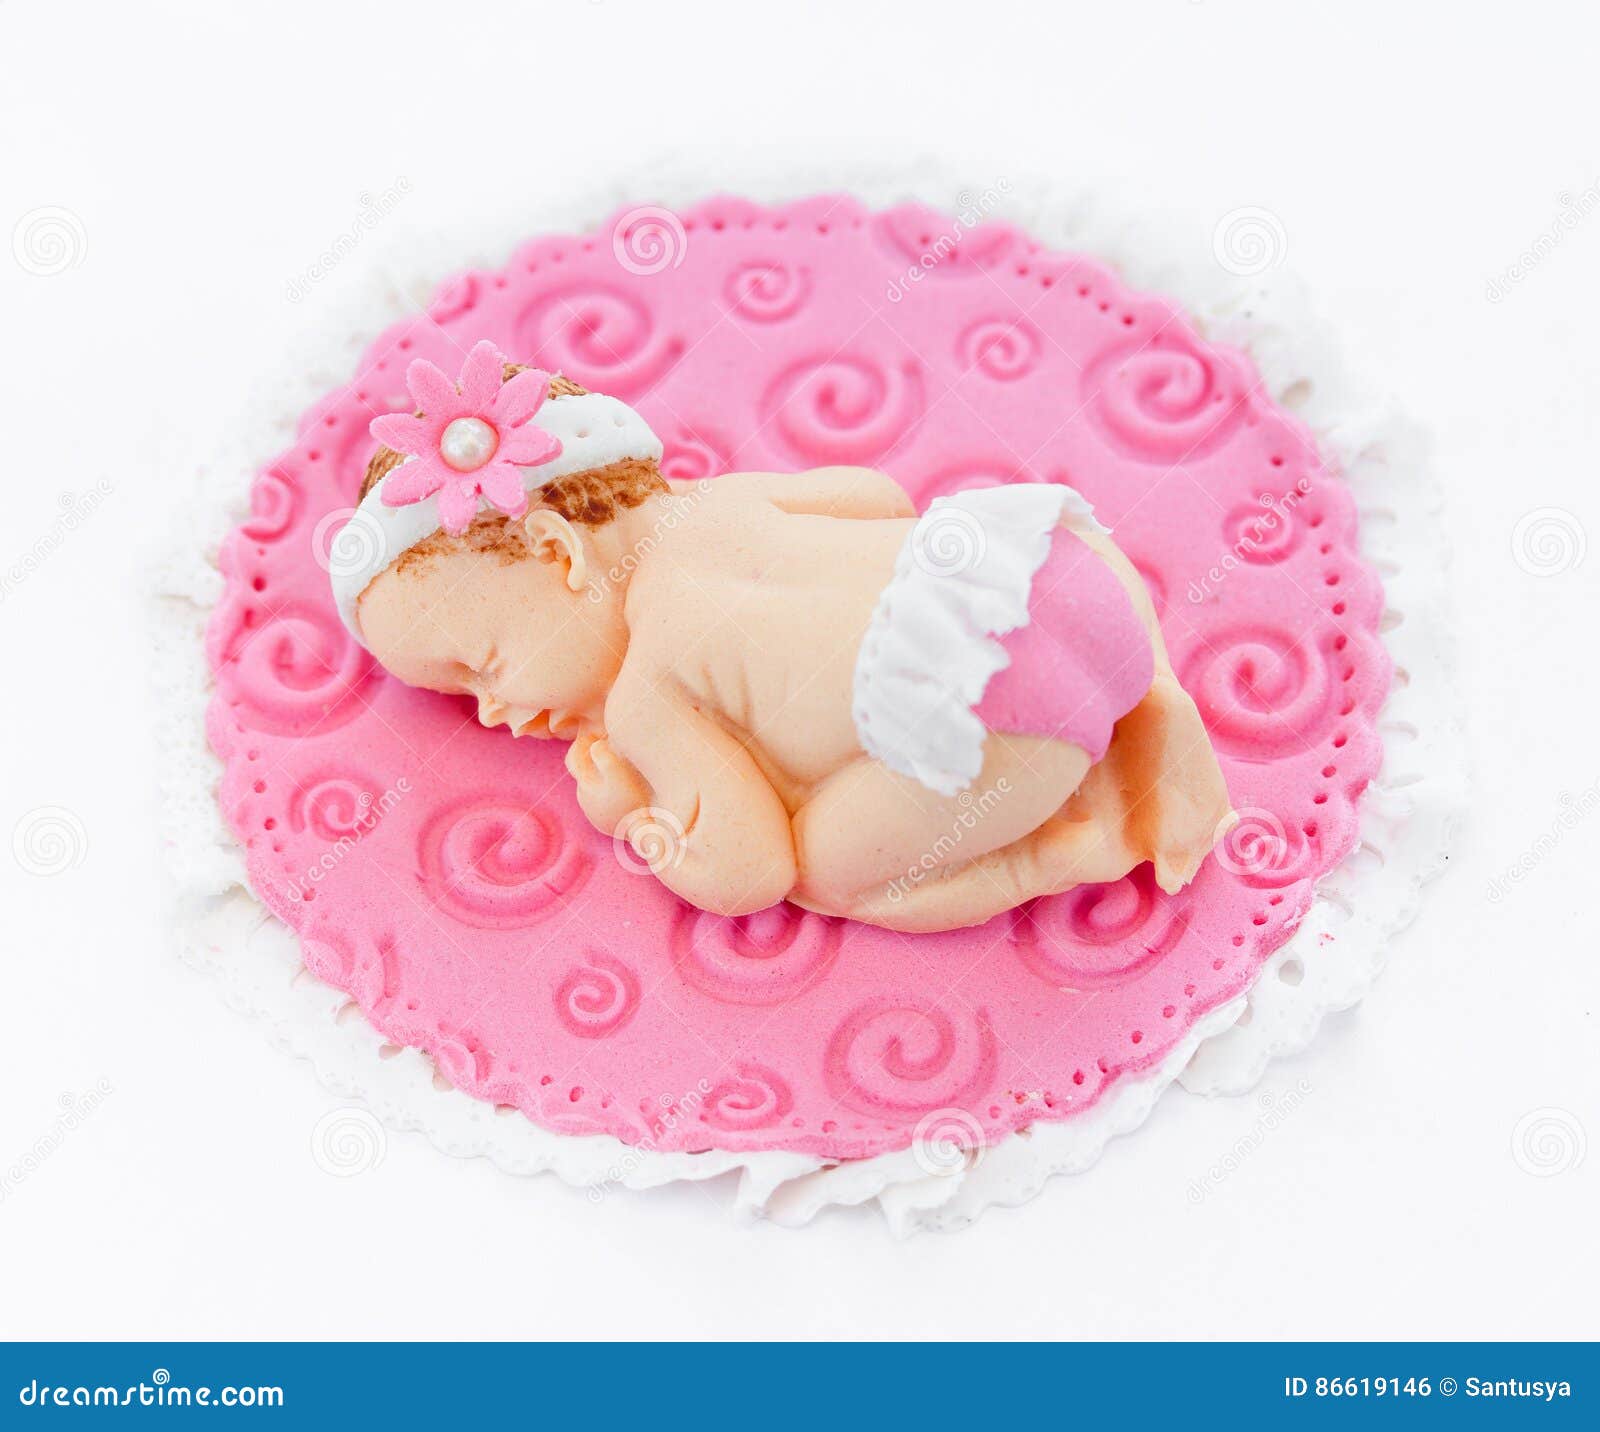 808 Baby Fondant Photos Free Royalty Free Stock Photos From Dreamstime